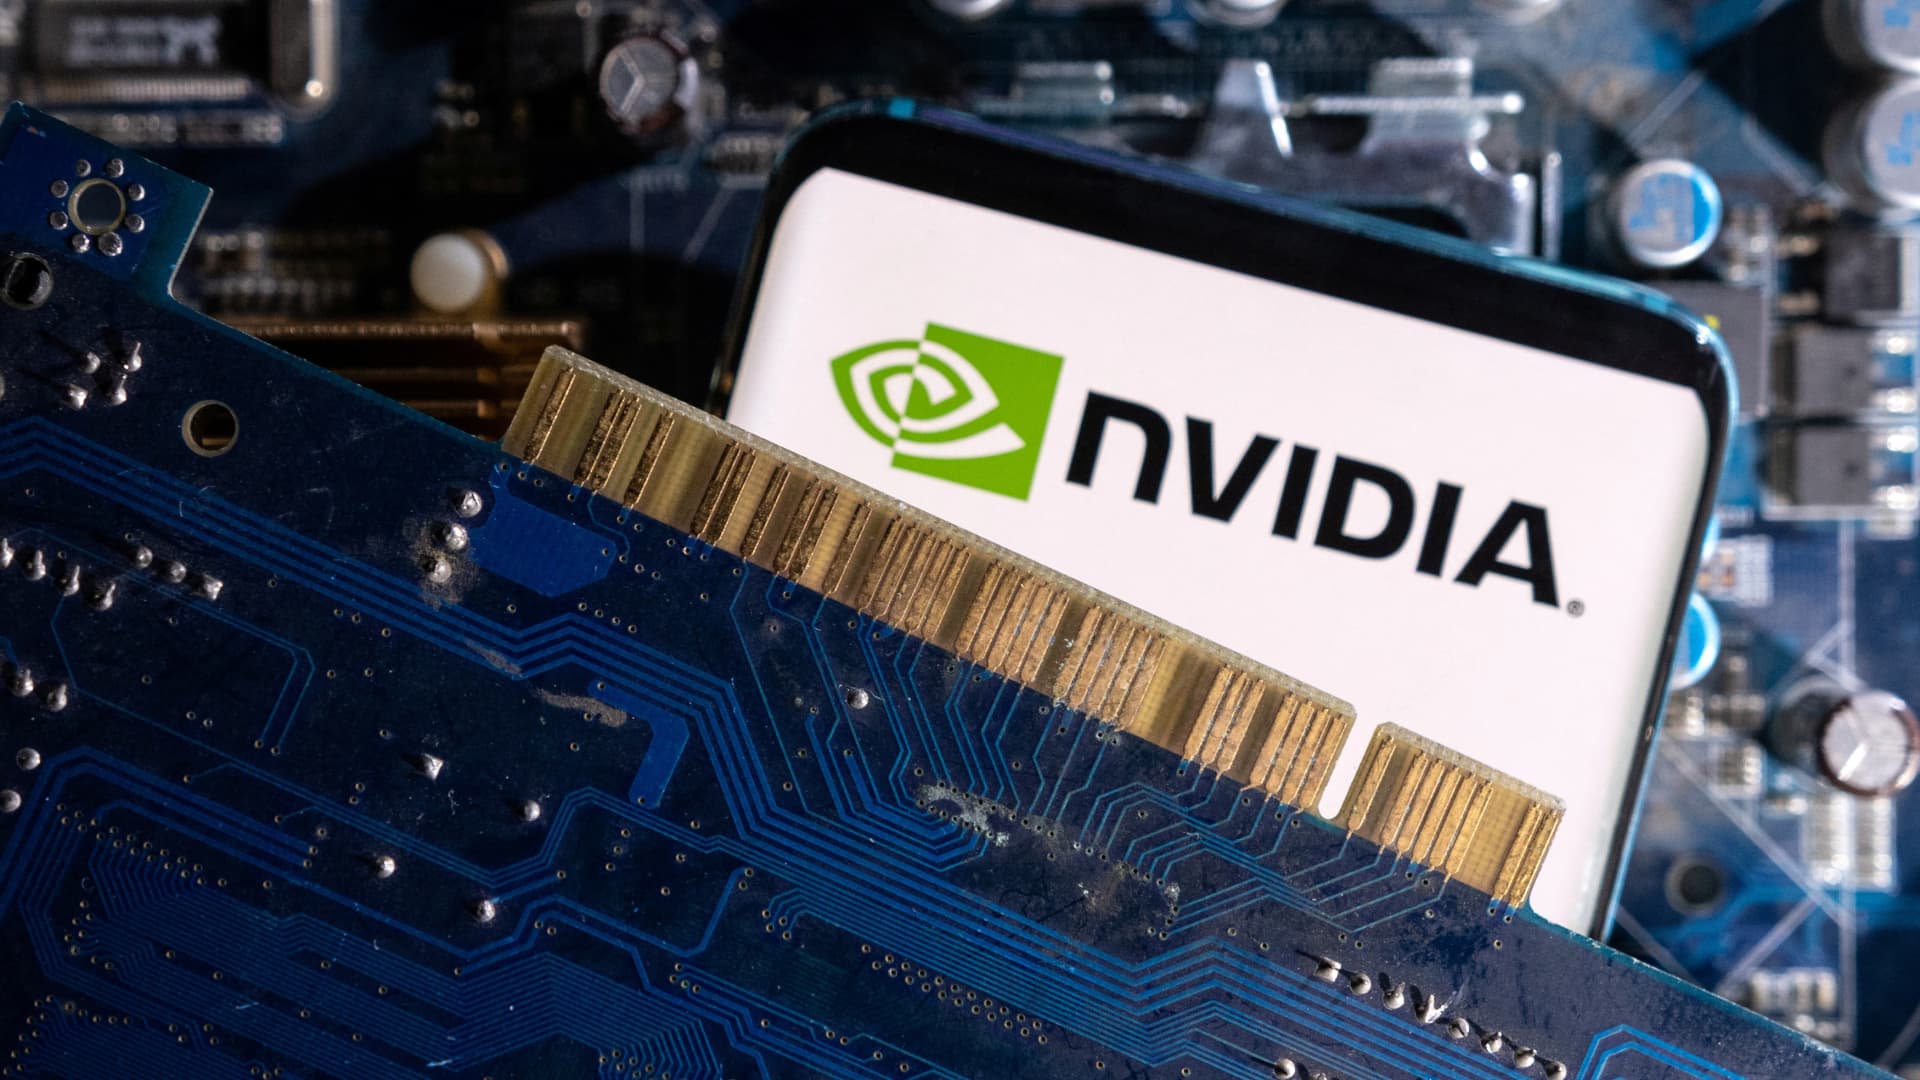 Acquire Nvidia inventory now or wait for another fall? Two fund managers disagree